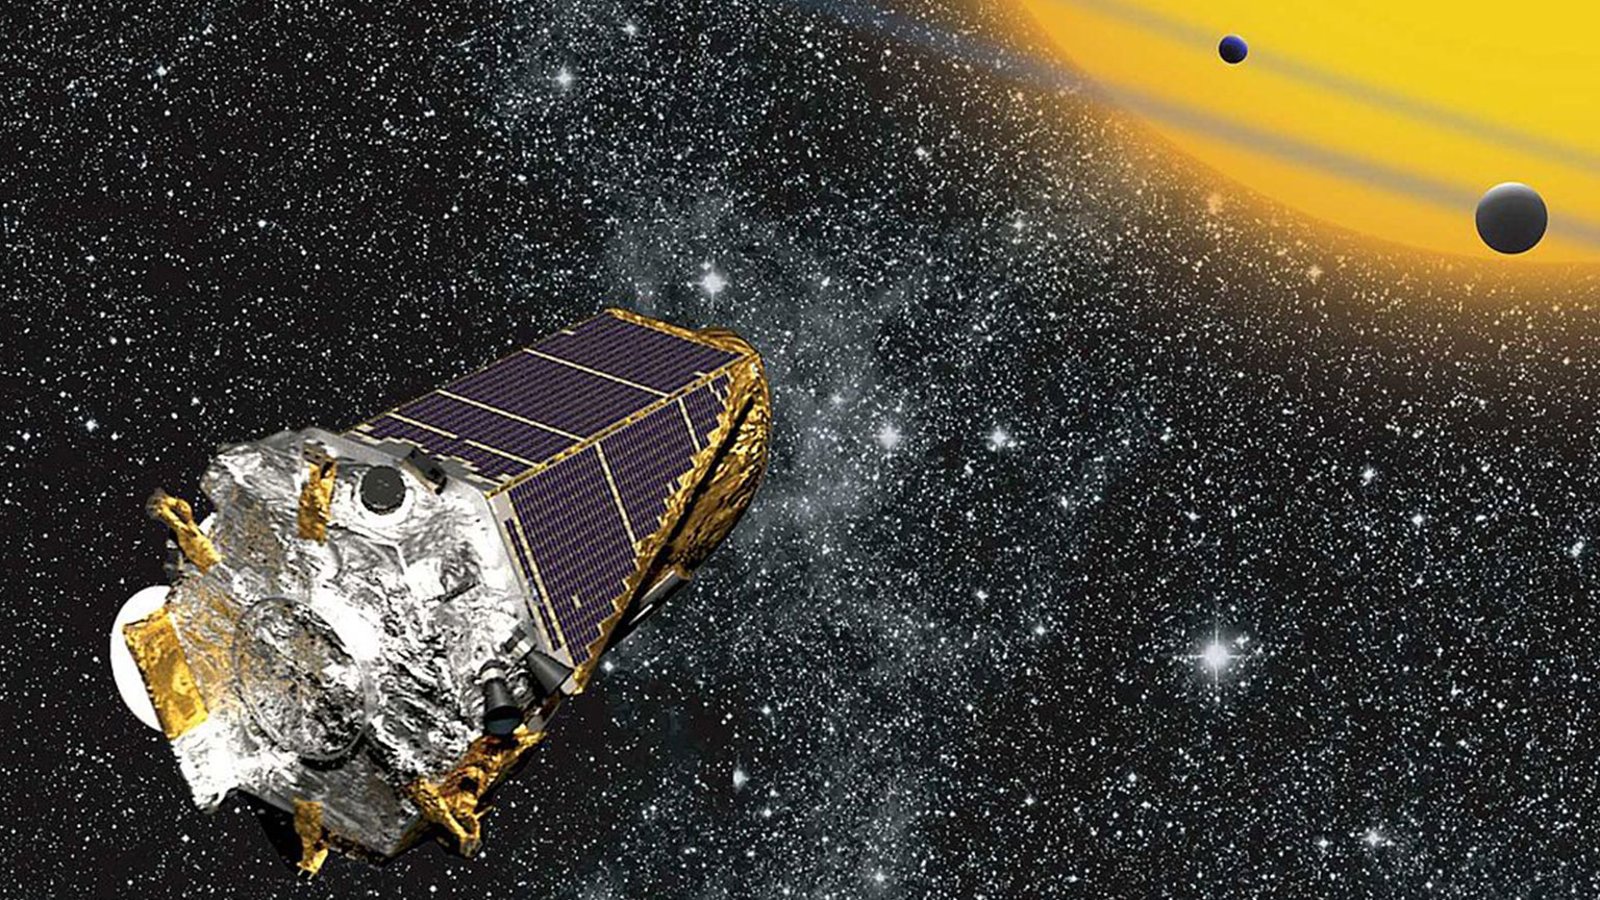 Transiting Planets and the Kepler Mission